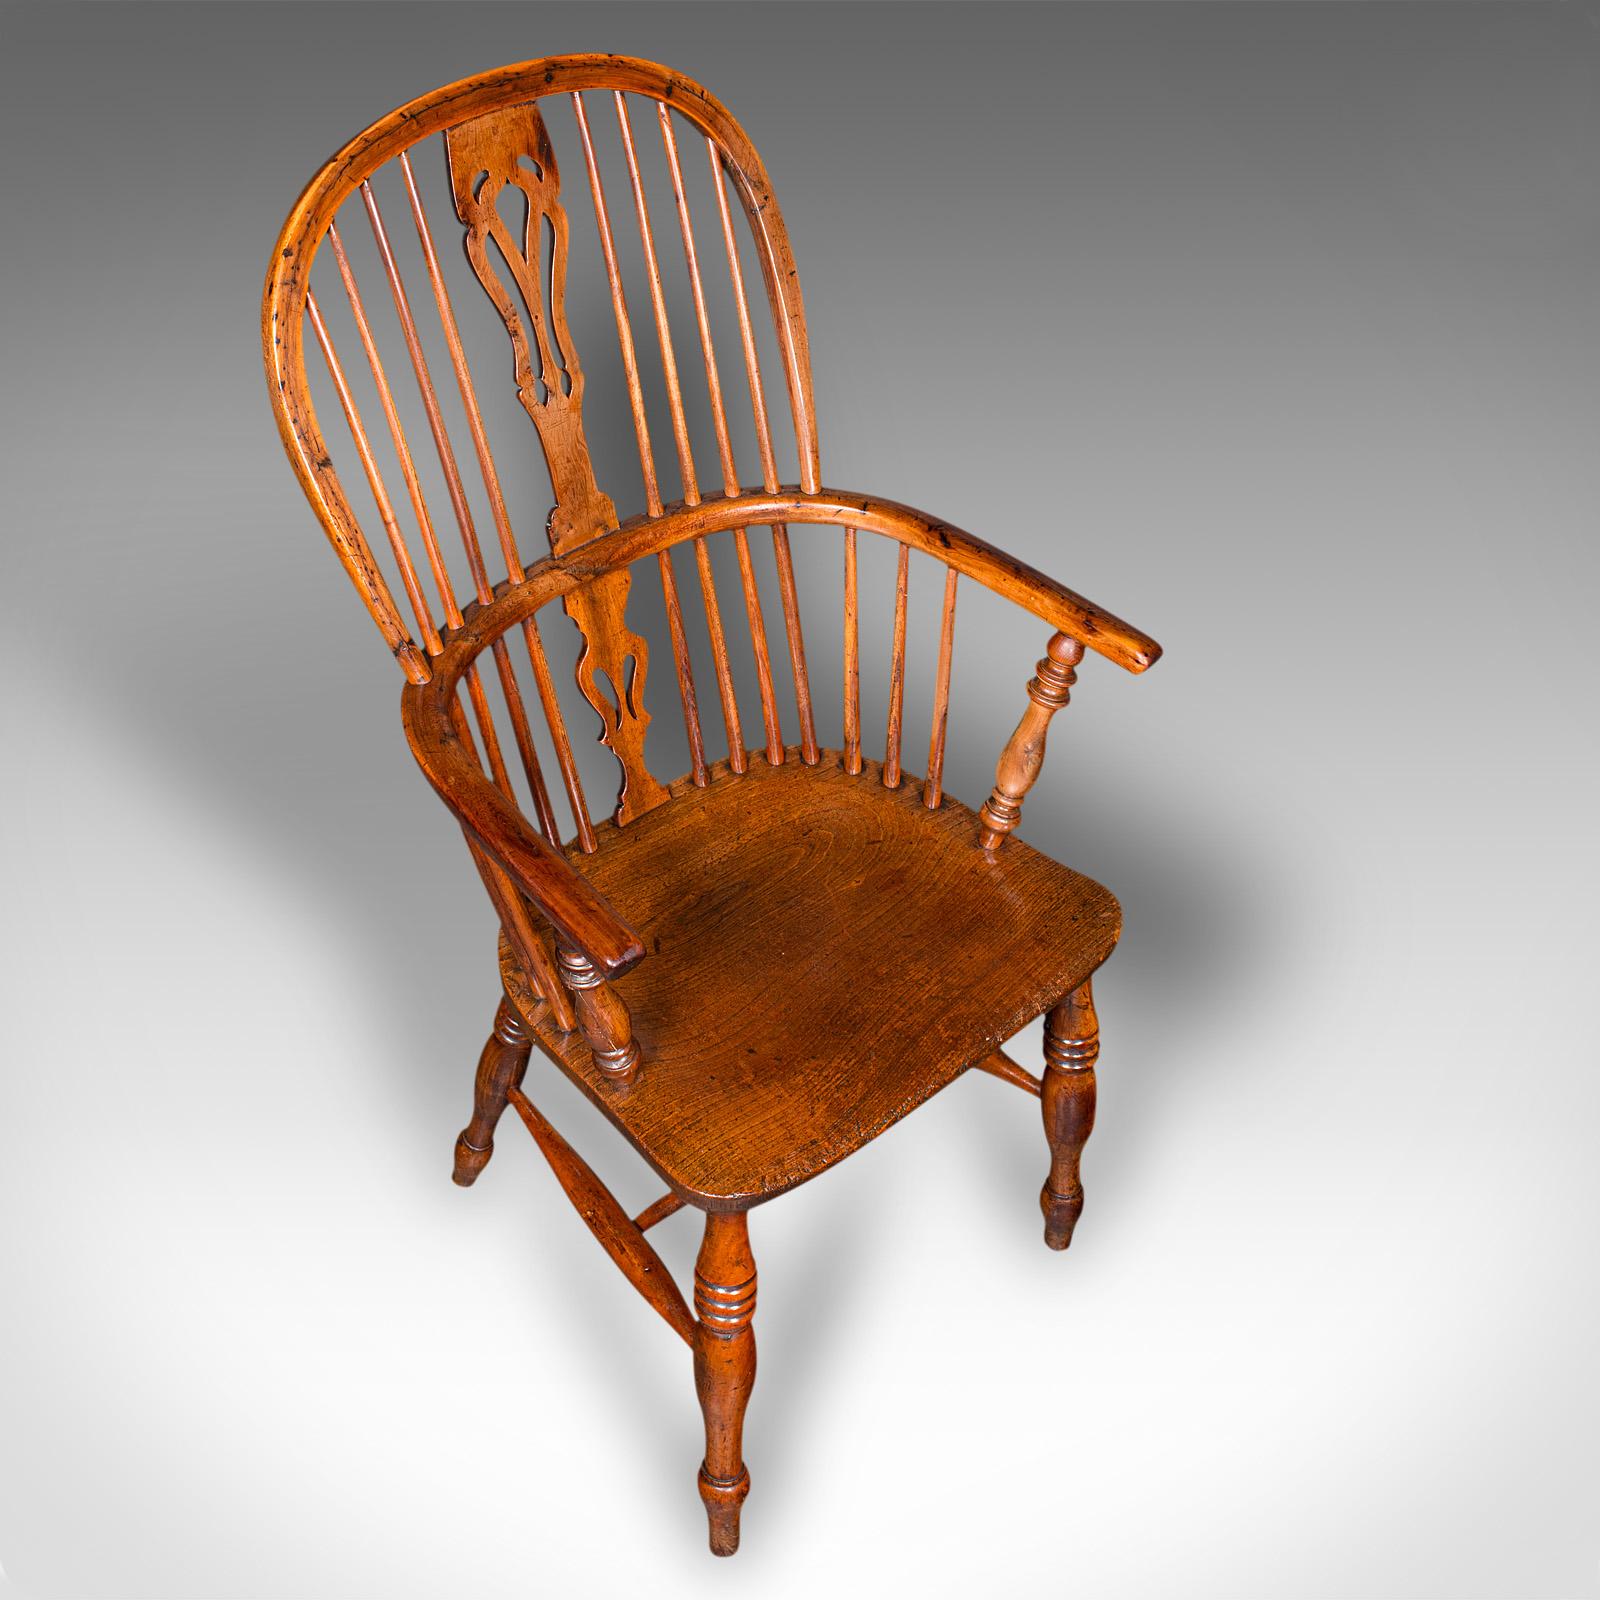 Antique Windsor Chair, English, Elm, Elbow, Armchair, Country House, Victorian 1